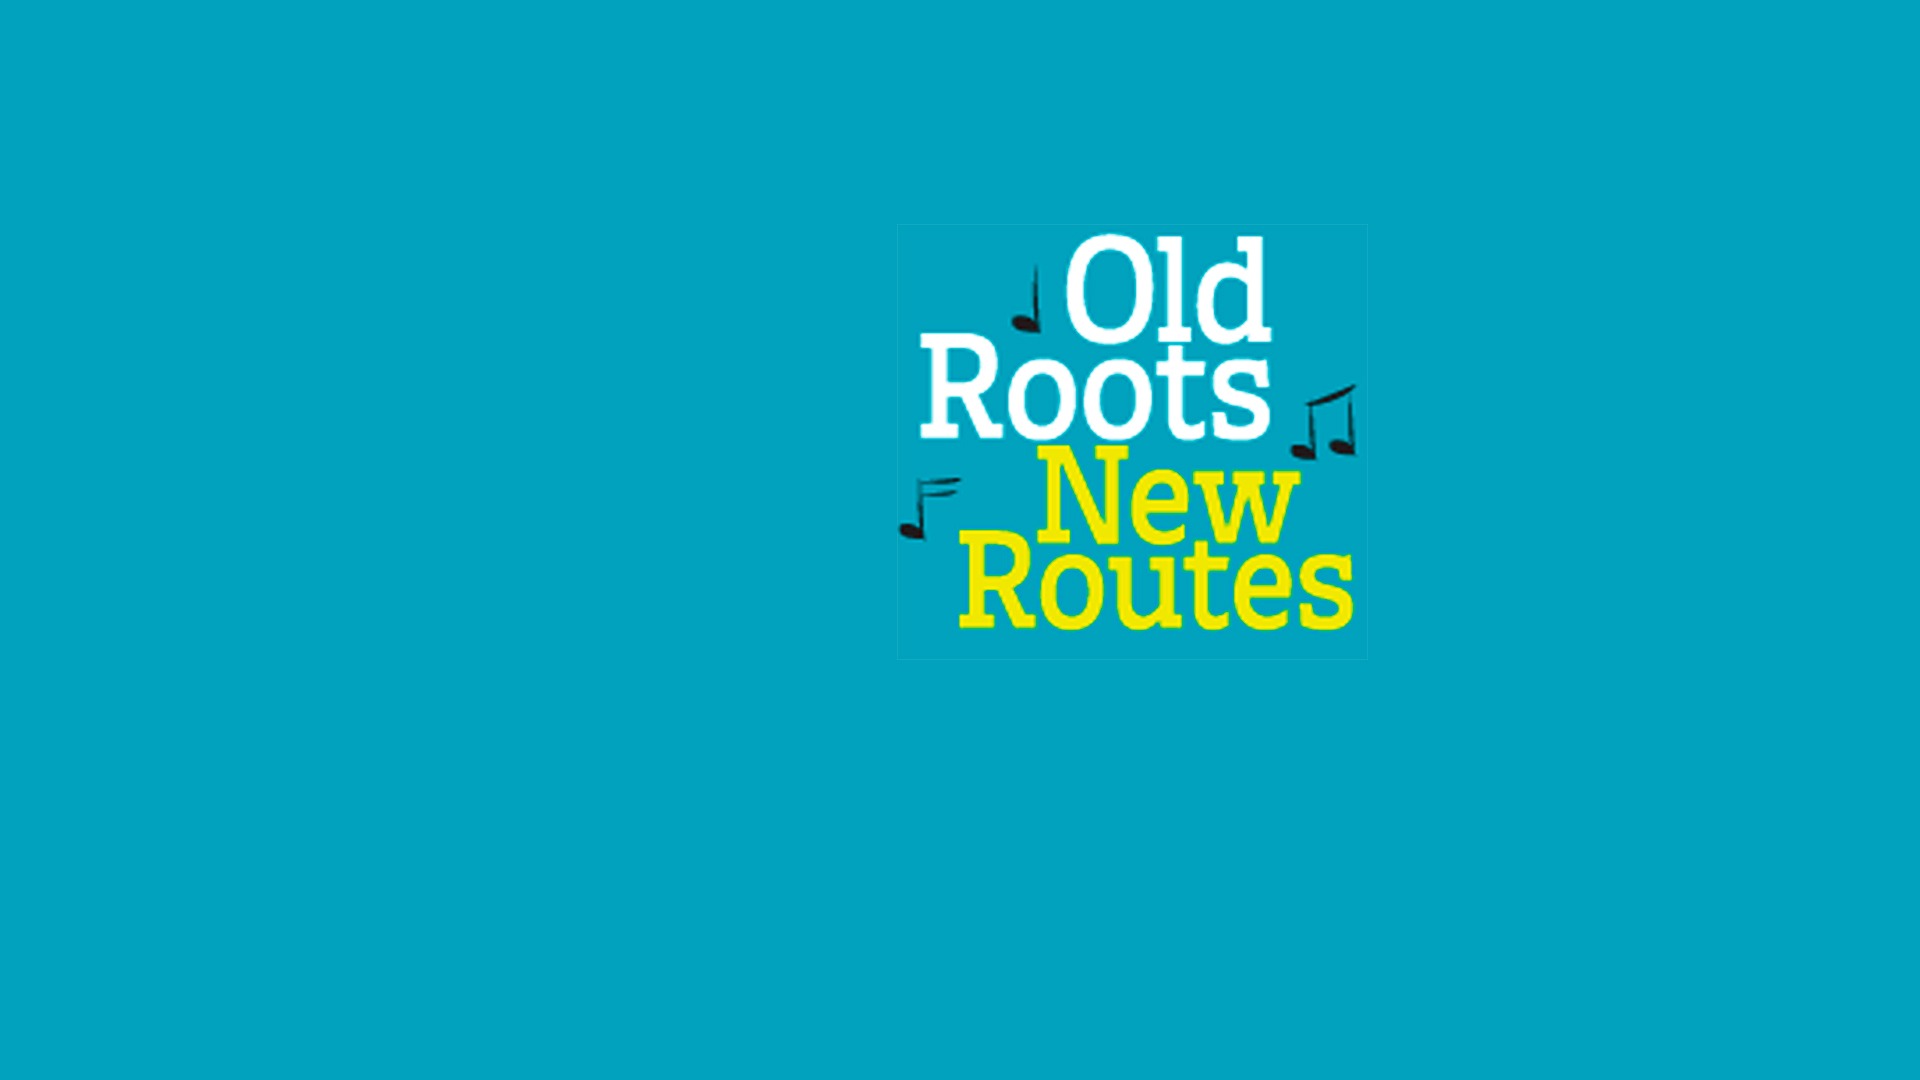 Old Roots New Routes